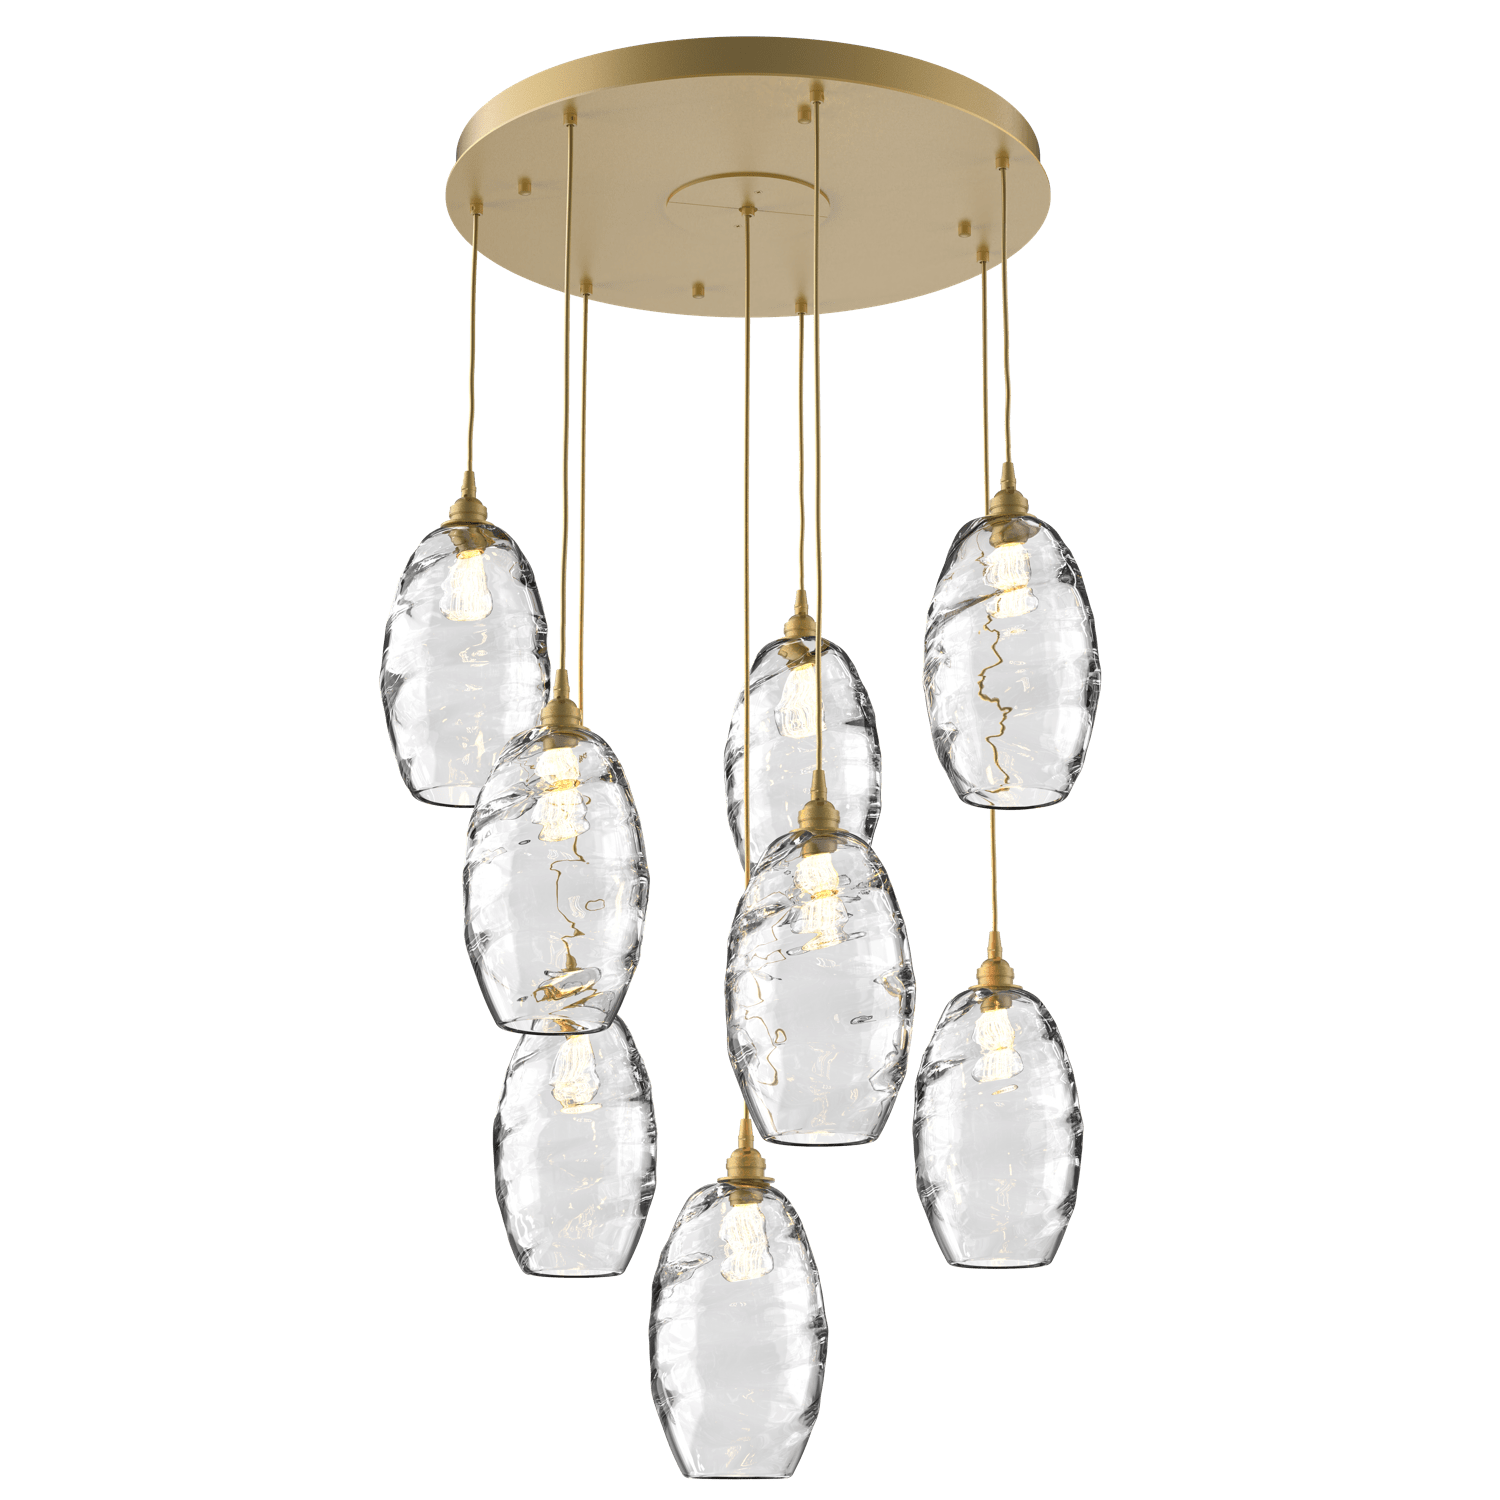 CHB0035-08-GB-OC-Hammerton-Studio-Optic-Blown-Glass-Elisse-8-light-round-pendant-chandelier-with-gilded-brass-finish-and-optic-clear-blown-glass-shades-and-incandescent-lamping